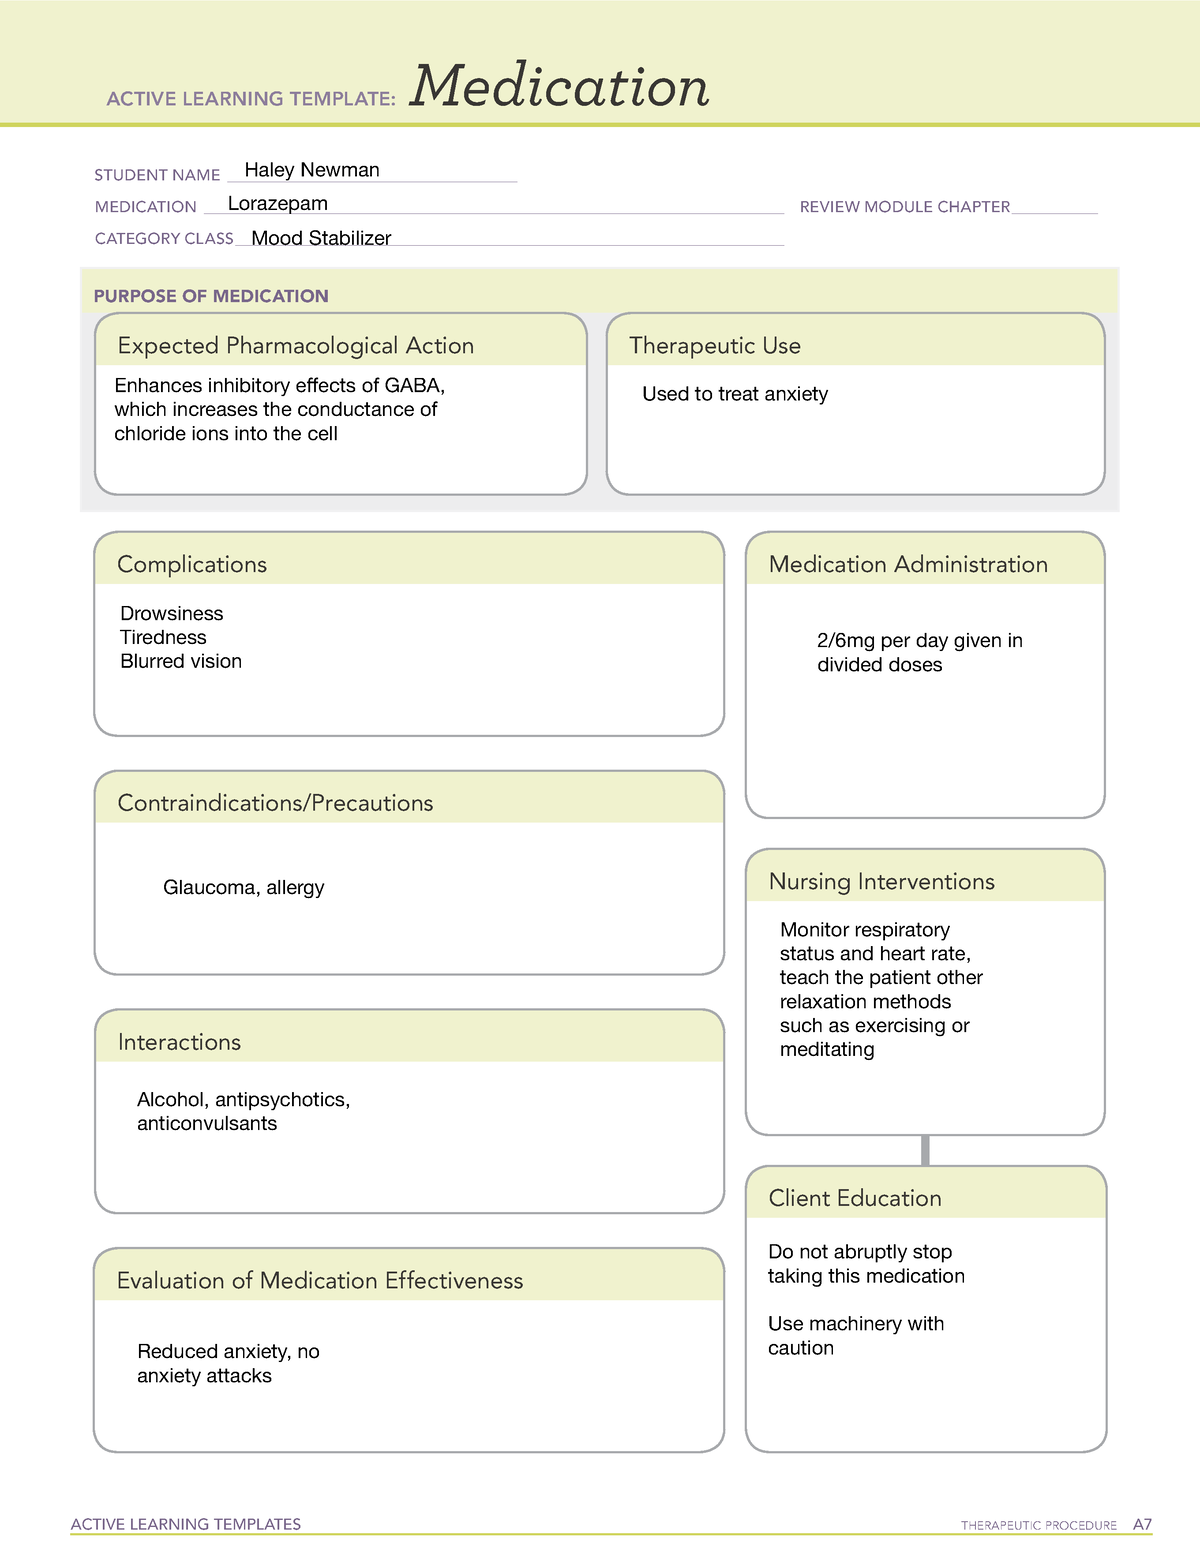 lorazepam-ati-template-active-learning-templates-therapeutic-procedure-a-medication-student